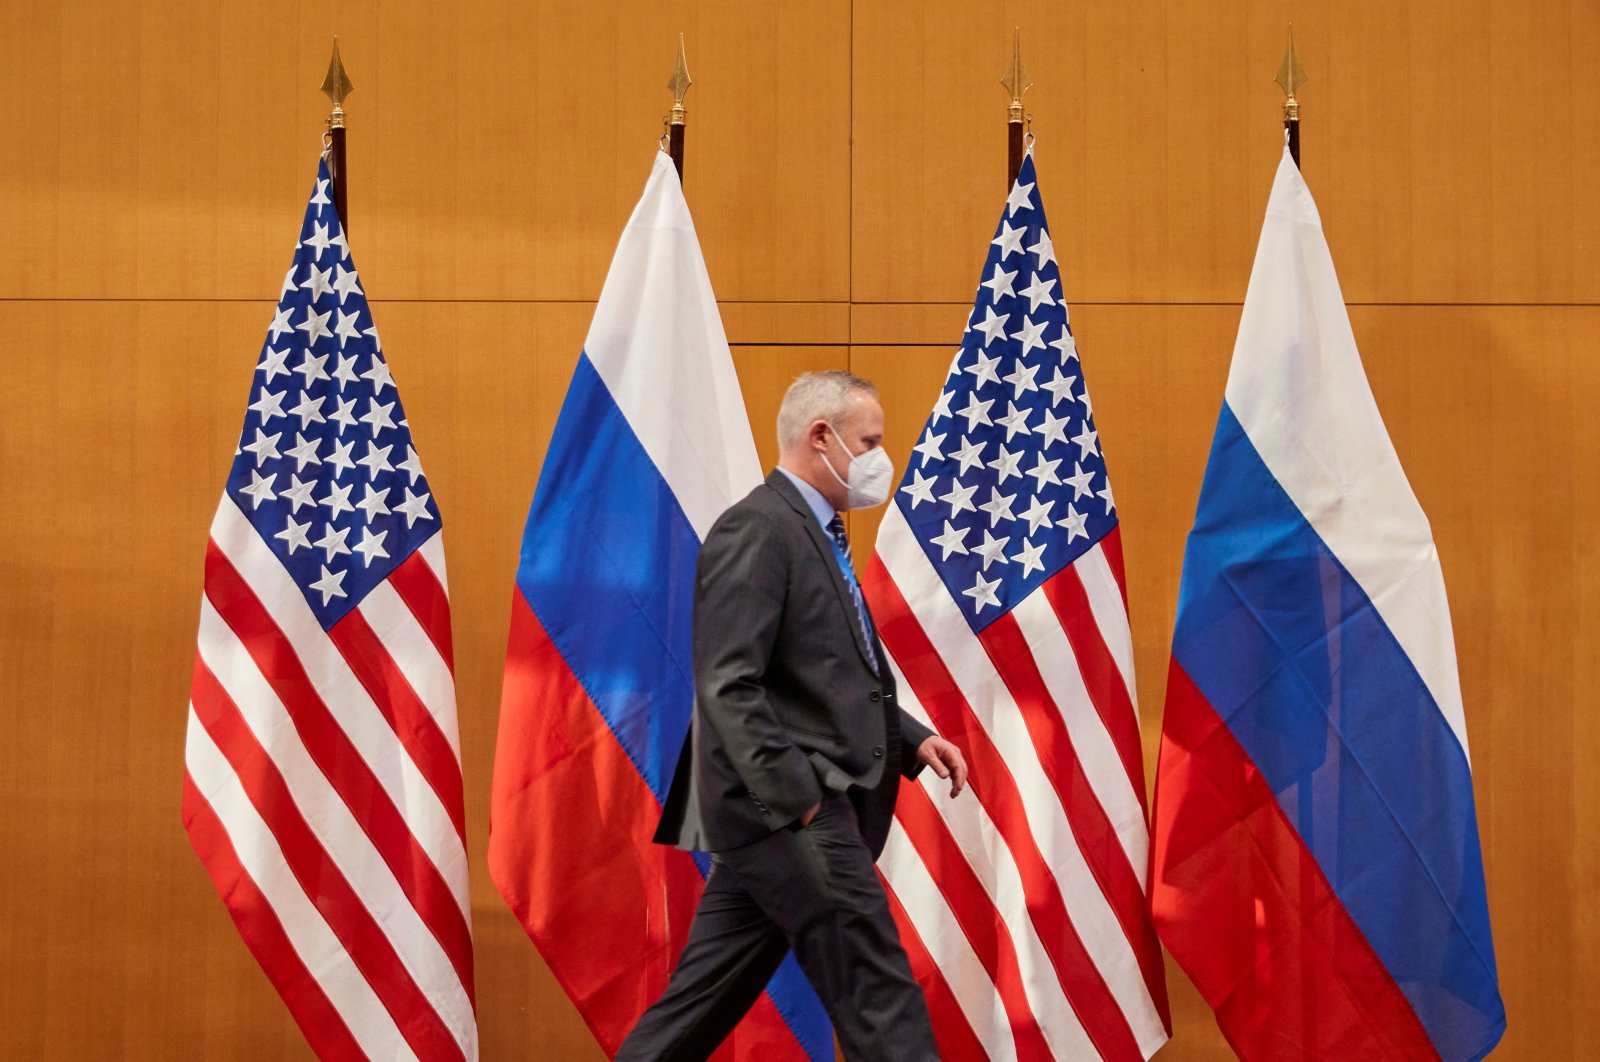 Russian and U.S. flags are pictured before talks between Russian Deputy Foreign Minister Sergei Ryabkov and U.S. Deputy Secretary of State Wendy Sherman (not pictured) at the United States Mission in Geneva, Switzerland, Jan. 10, 2022. (Reuters File Photo)